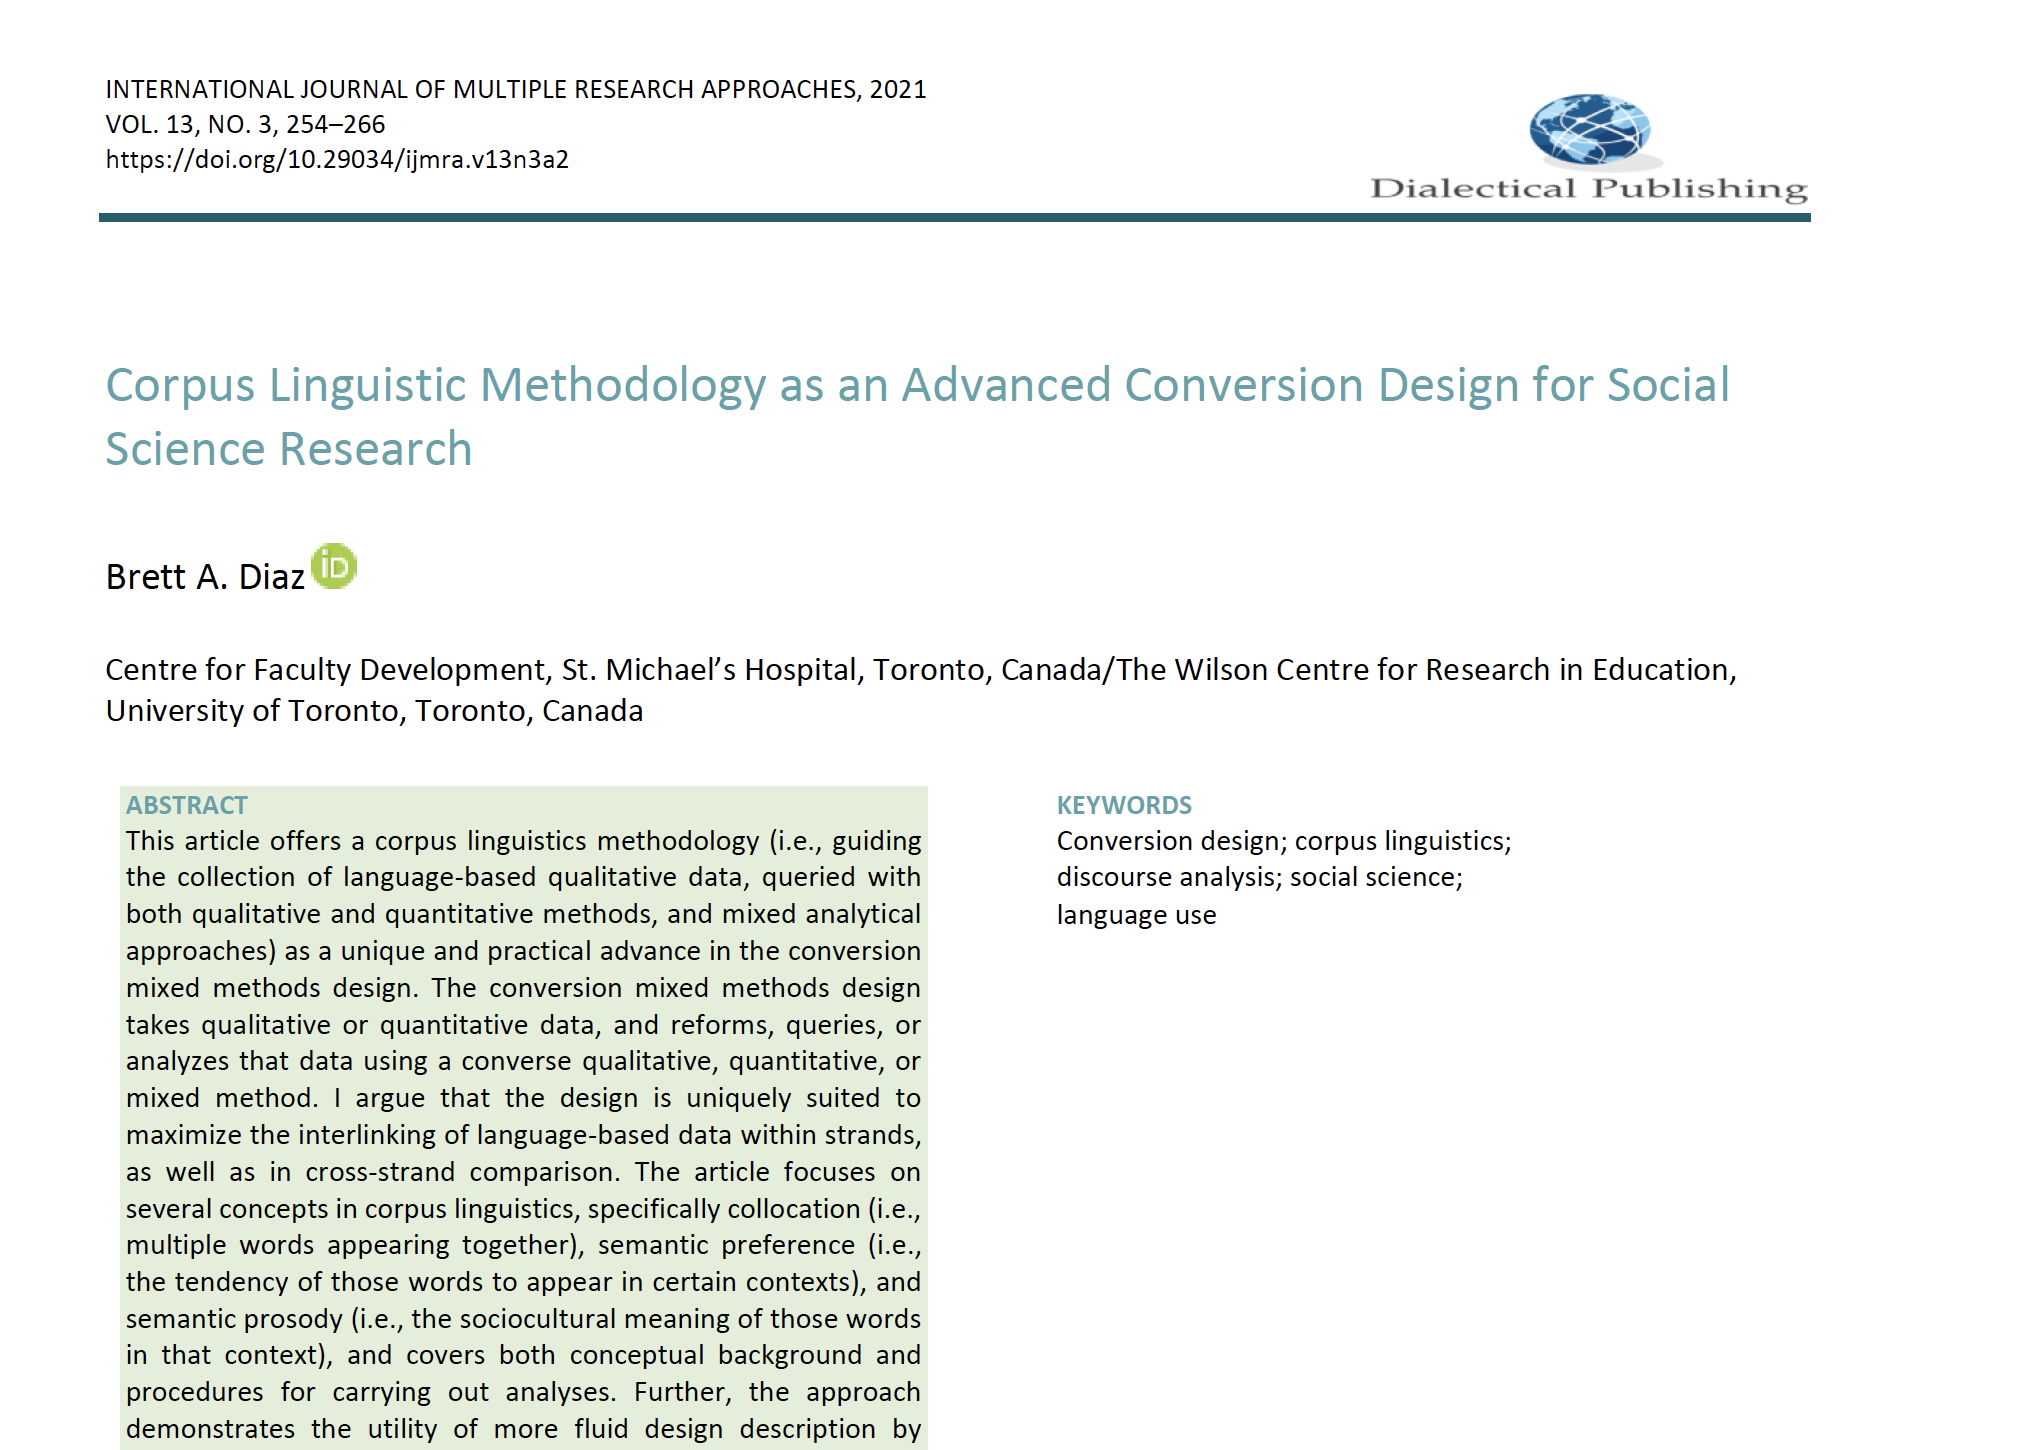 Corpus　Design　Advanced　an　Linguistic　03.　–　IJMRA　as　Research　Conversion　Social　for　Science　13(3).　Methodology